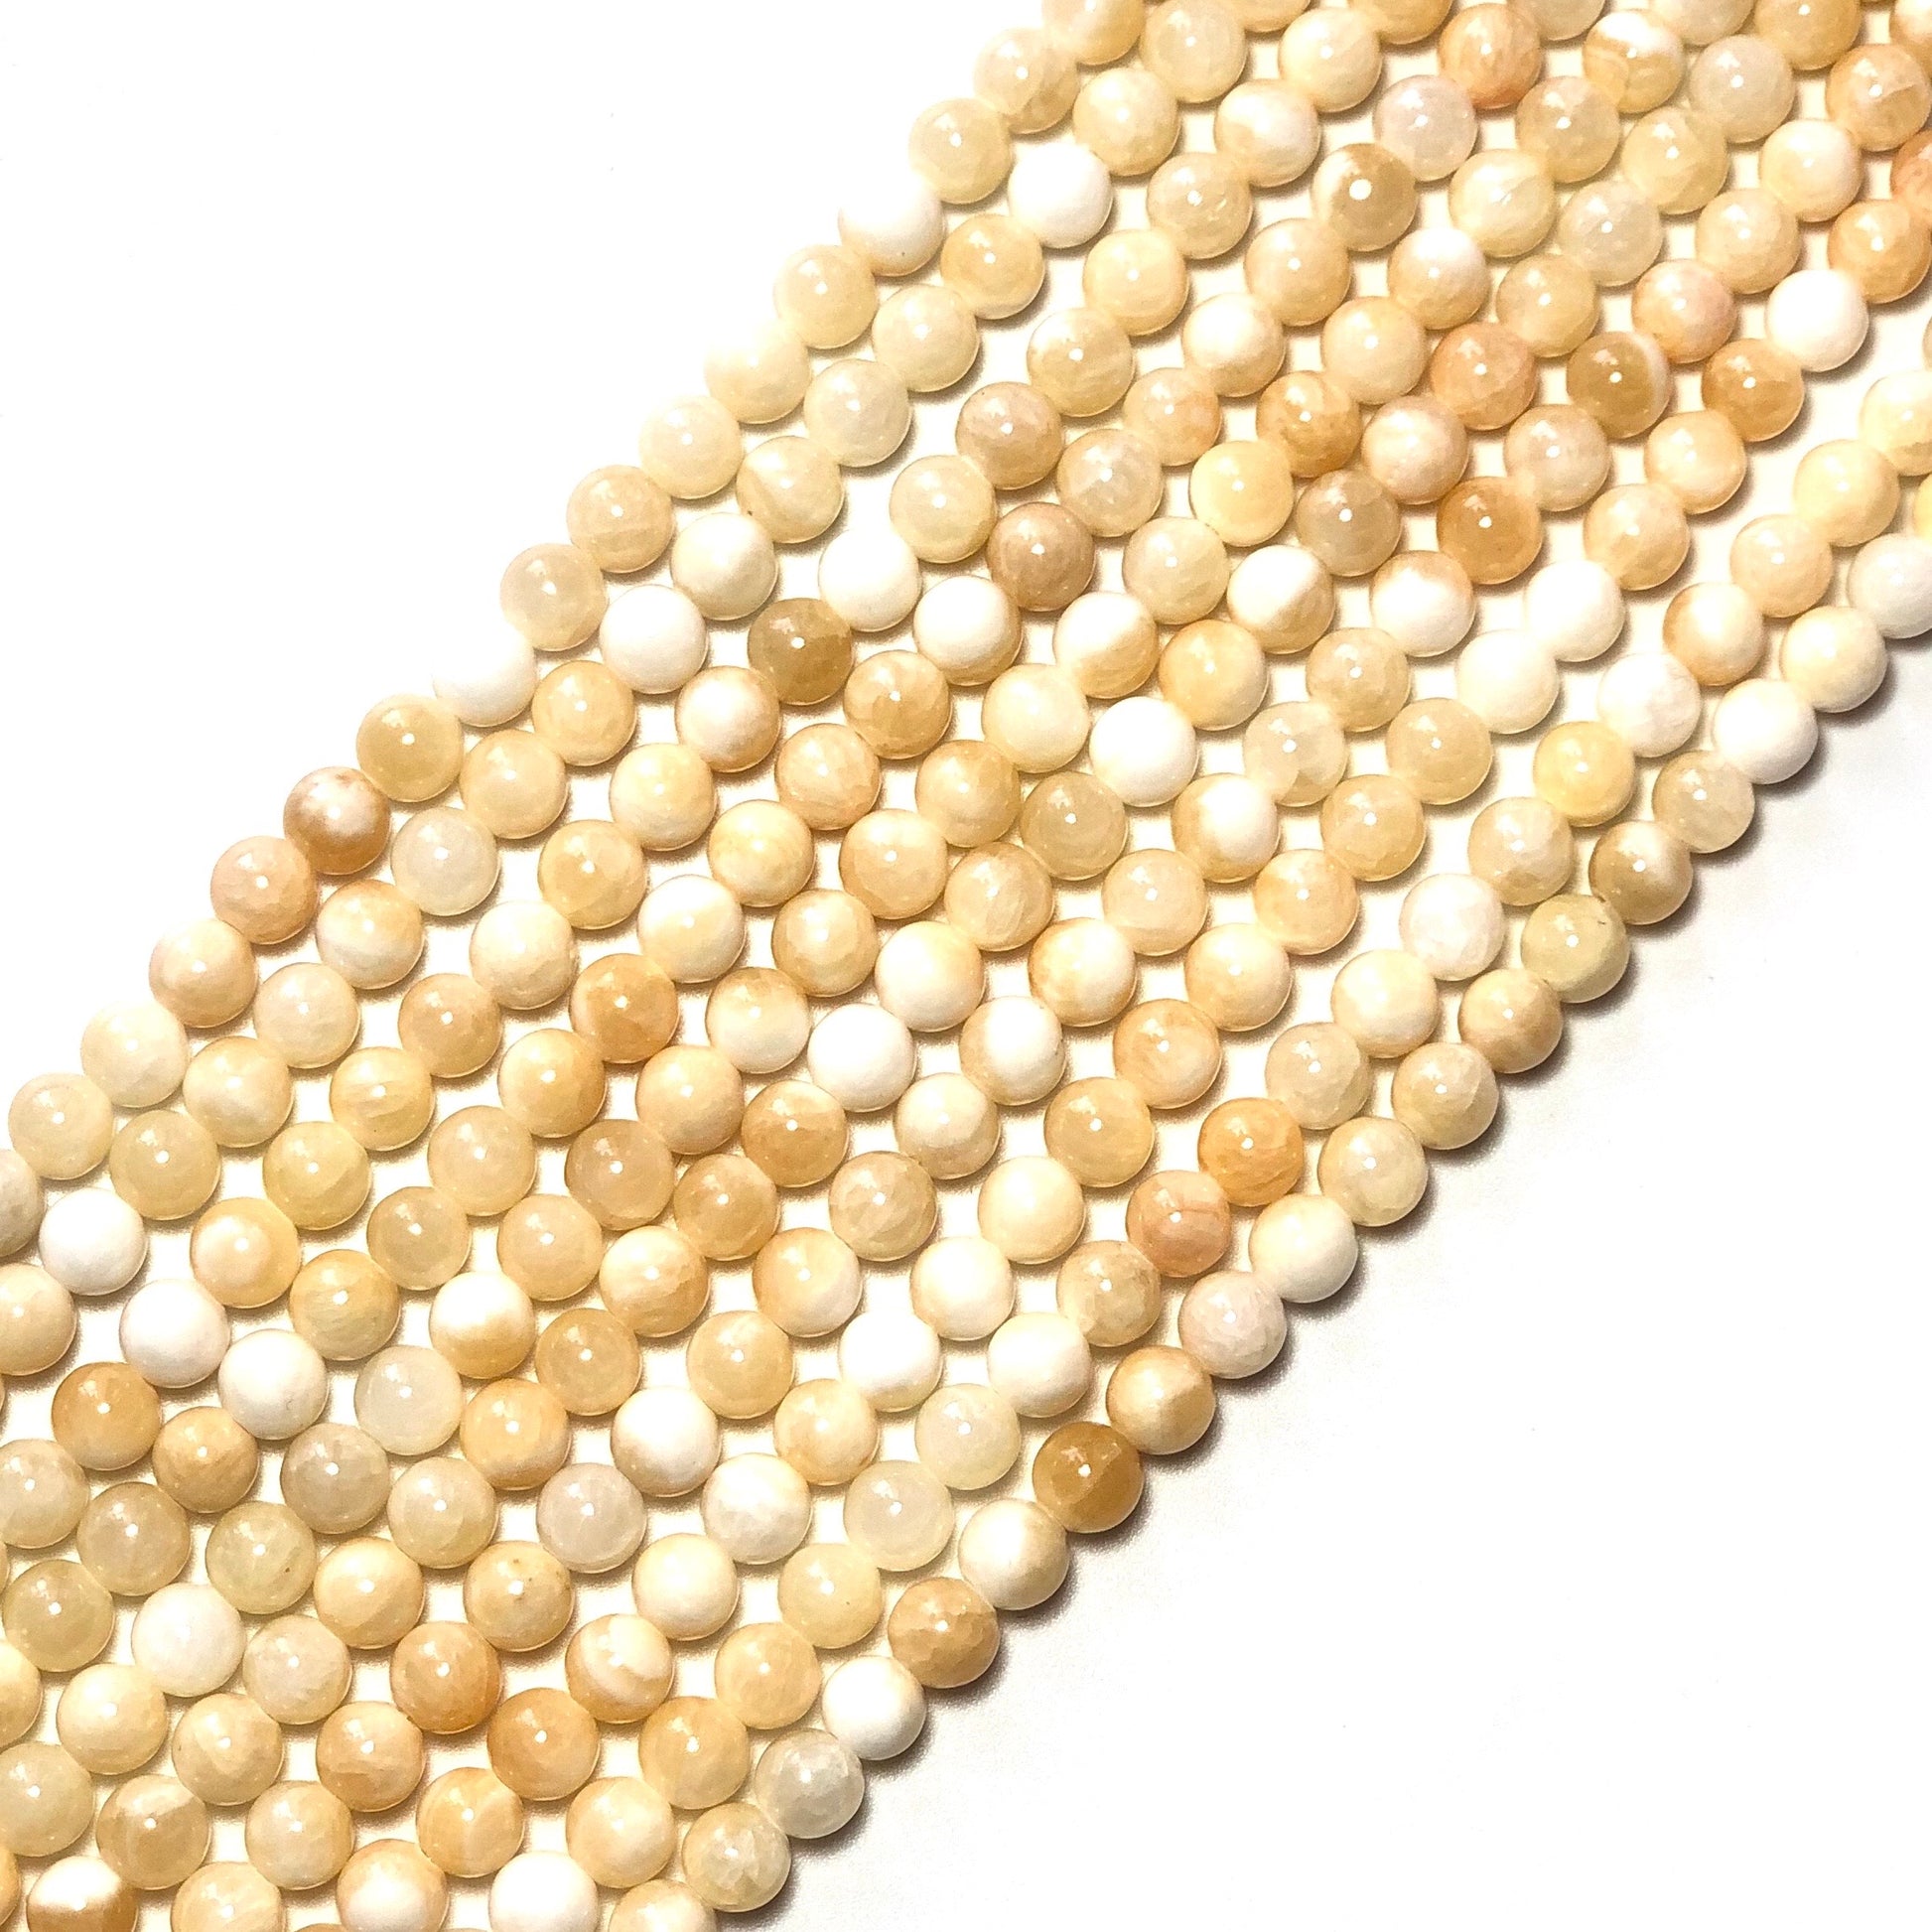 2 Strands/lot 8mm, 10mm Natural Yellow Jade Round Stone Beads Stone Beads 8mm Stone Beads Round Jade Beads Charms Beads Beyond